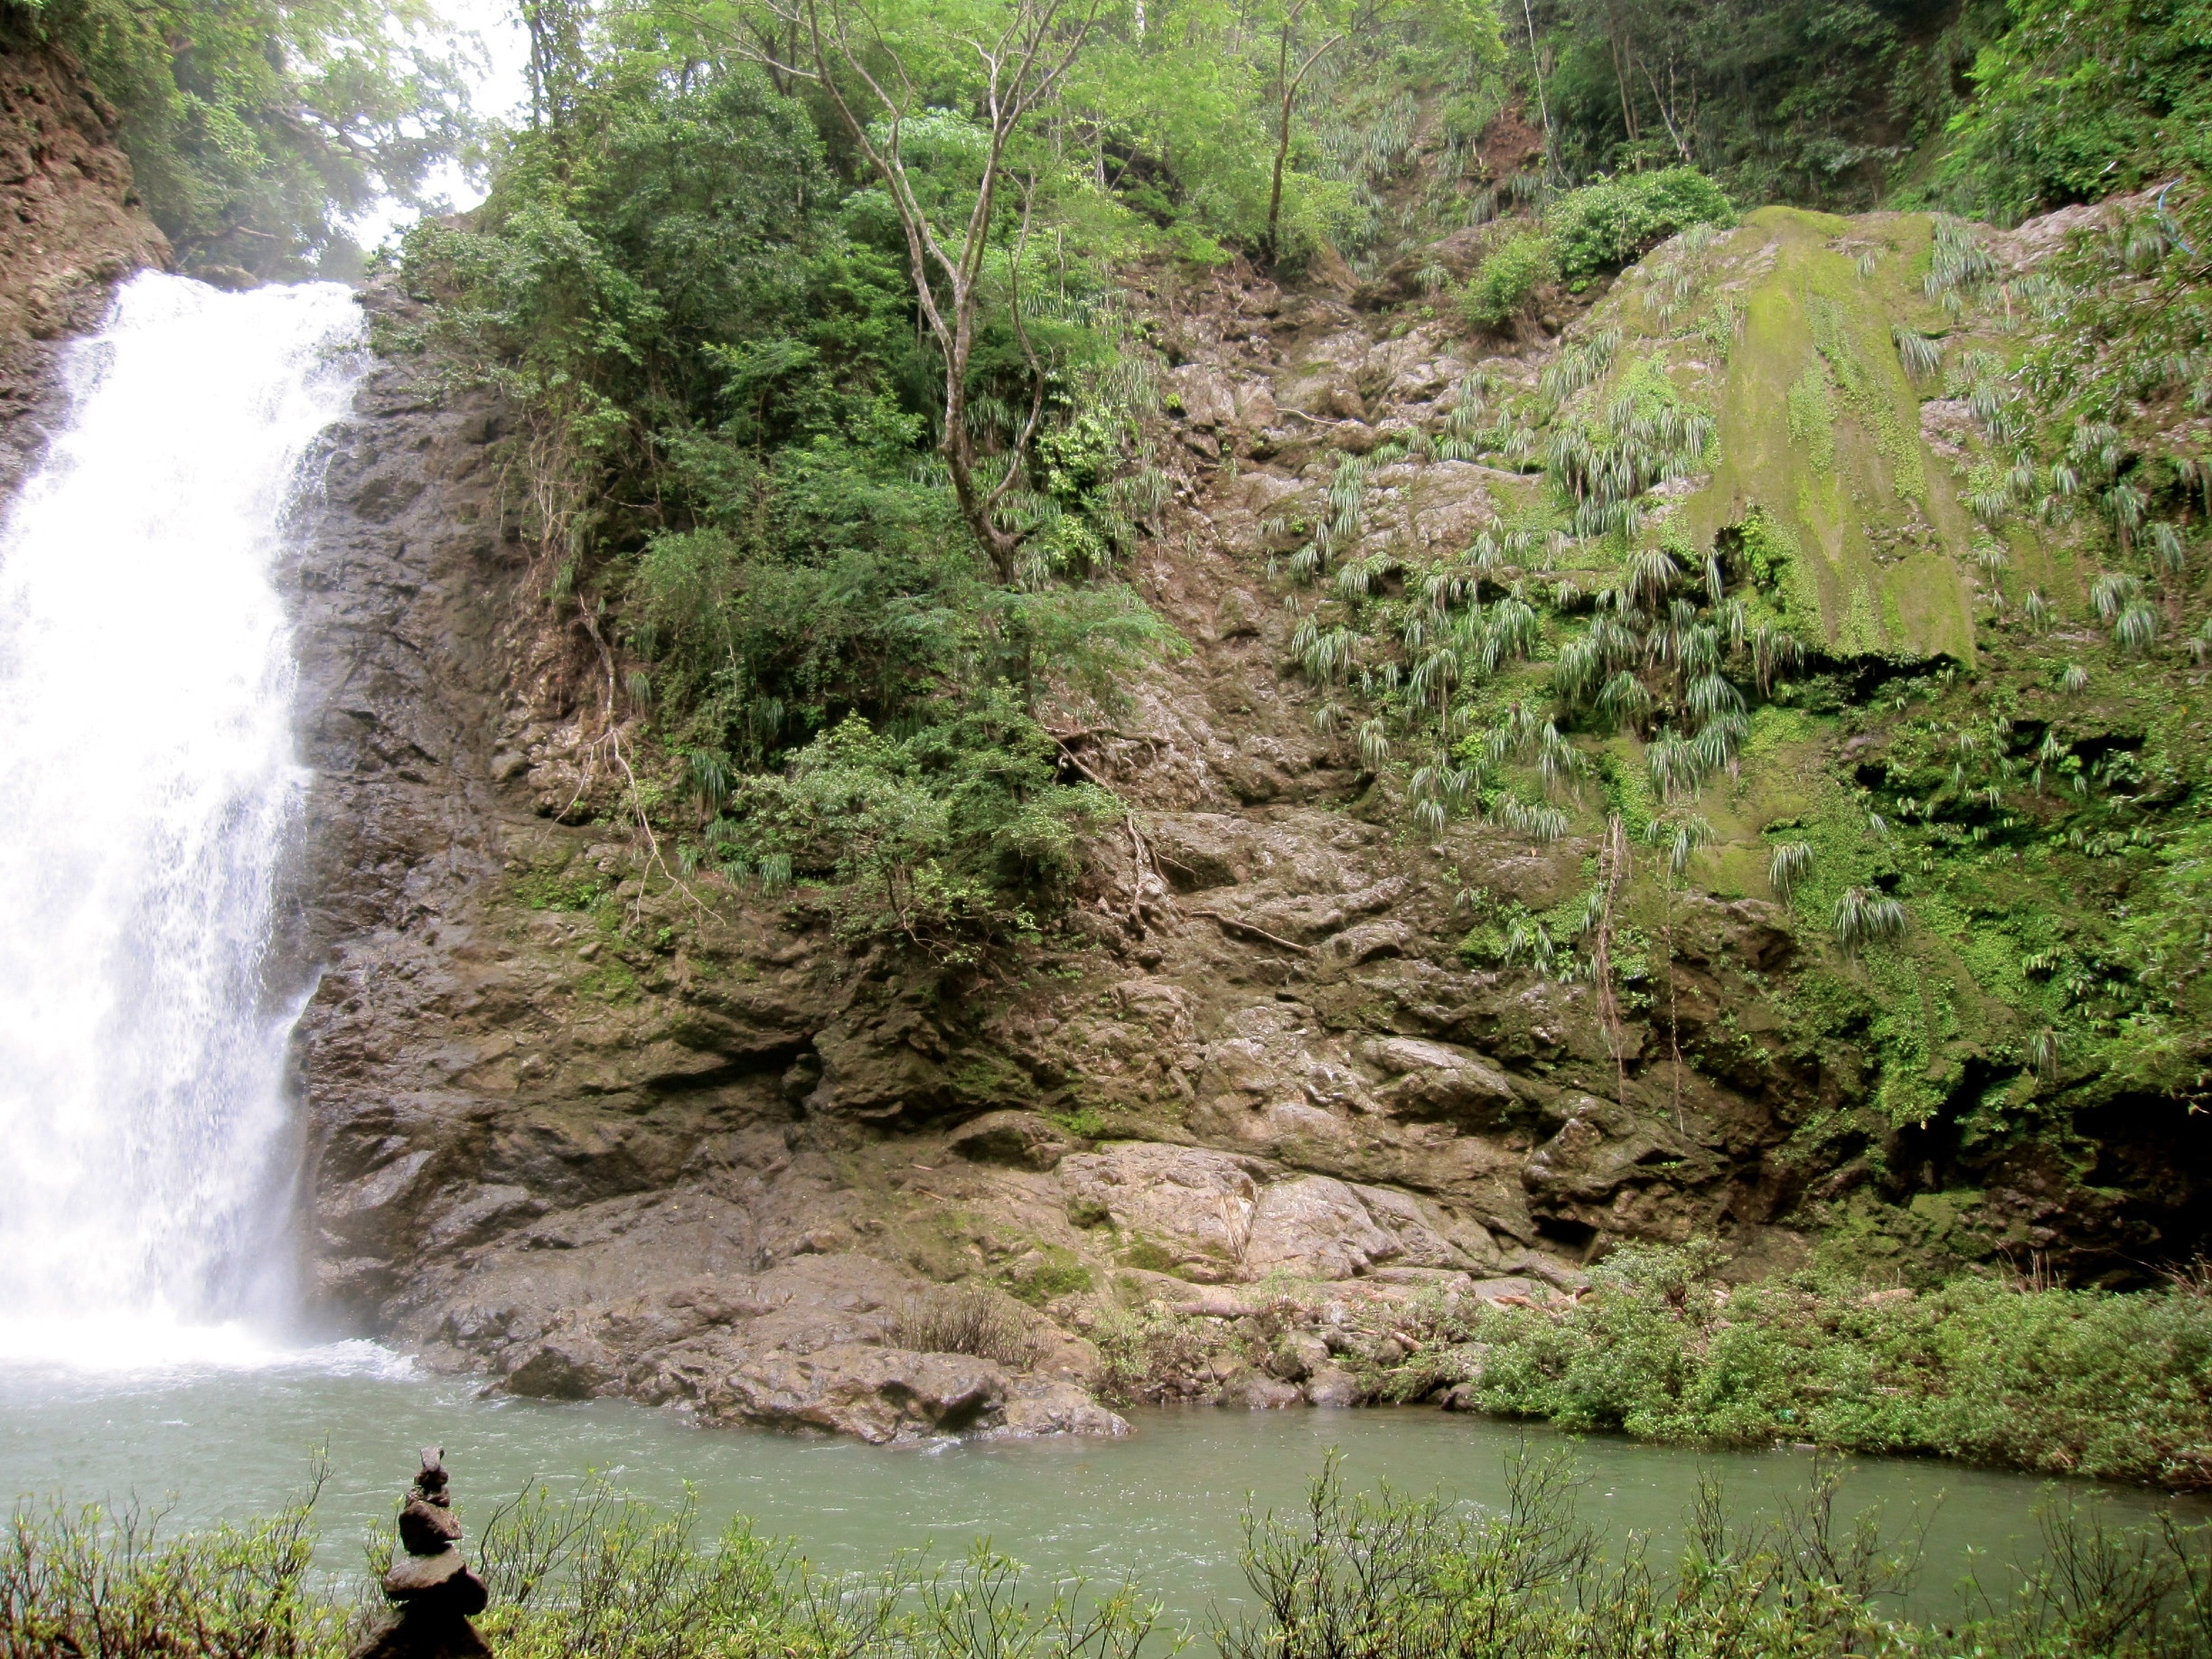 These are the Montezuma waterfalls-- and there are two more above this big one that you can jump off! 
Only a 20-30 minute hike up to the top. Be sure let a local show you the longer way around to hike to the 2nd and 3rd falls rather than climb up waterfall itself.
To find them you just go behind the Mariposario bed and breakfast.